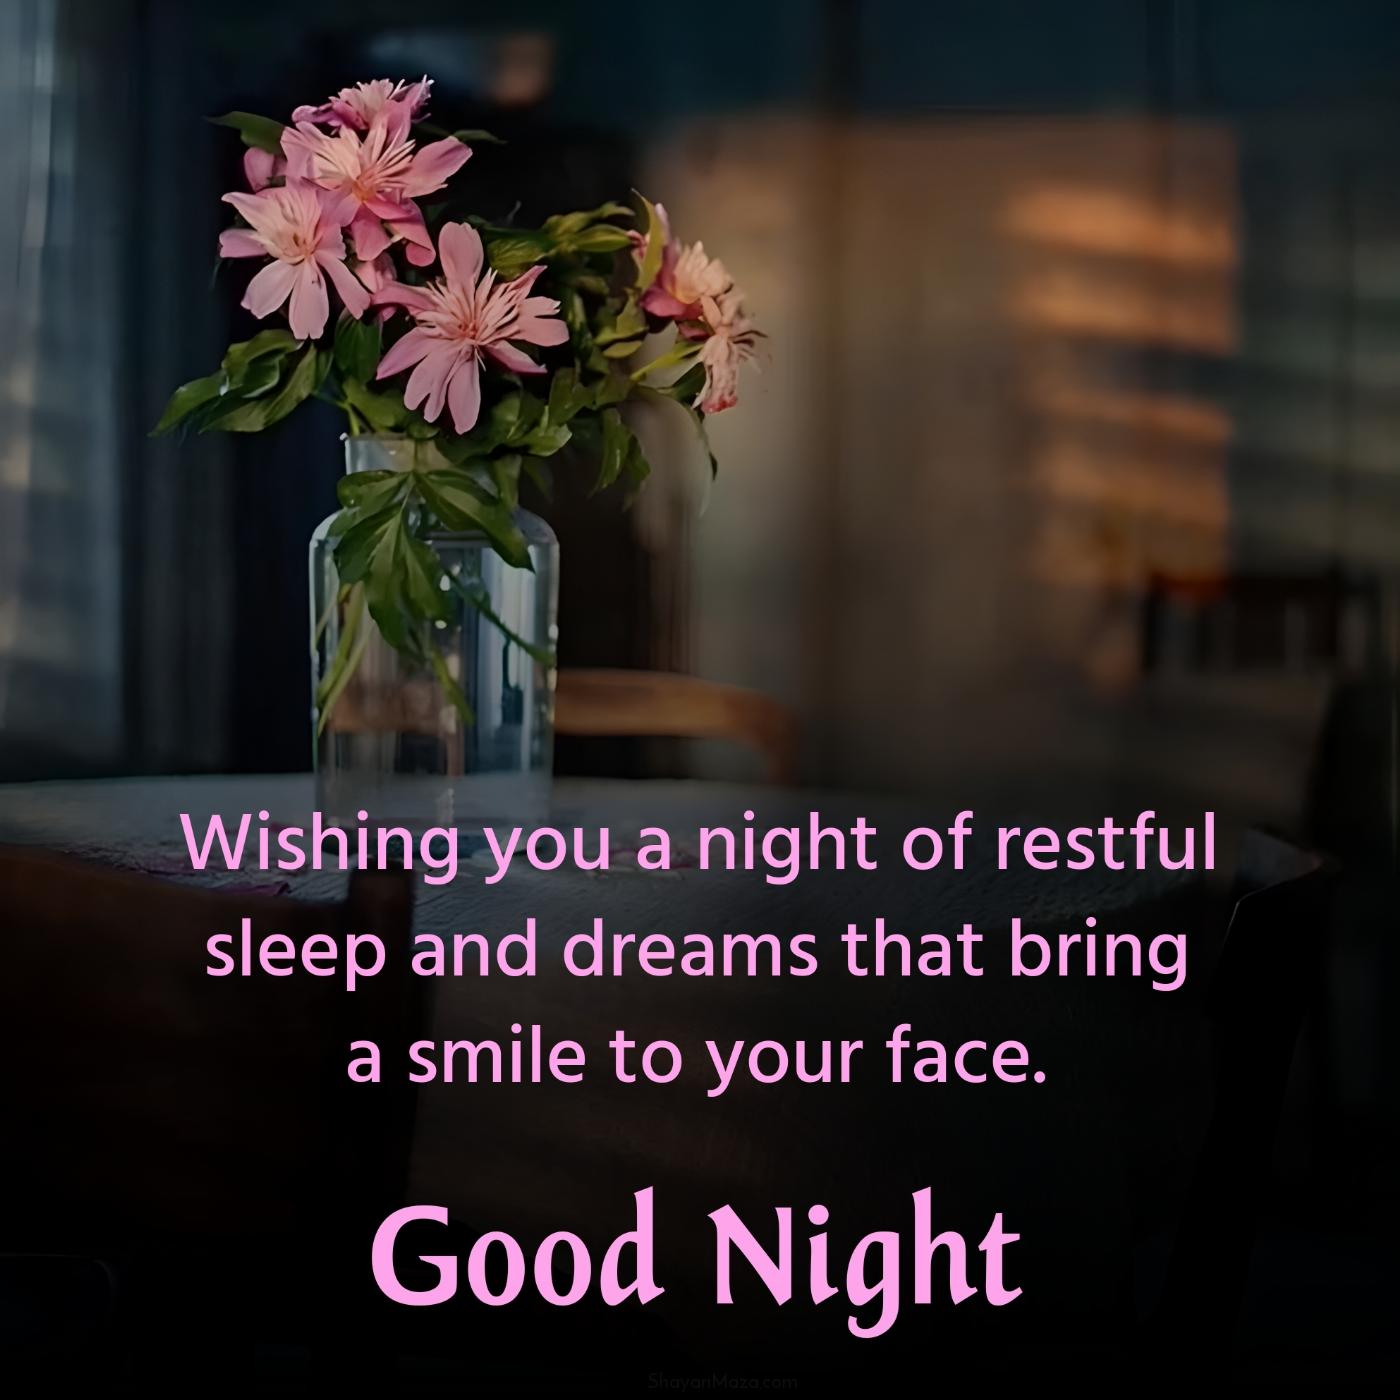 Wishing you a night of restful sleep and dreams that bring a smile